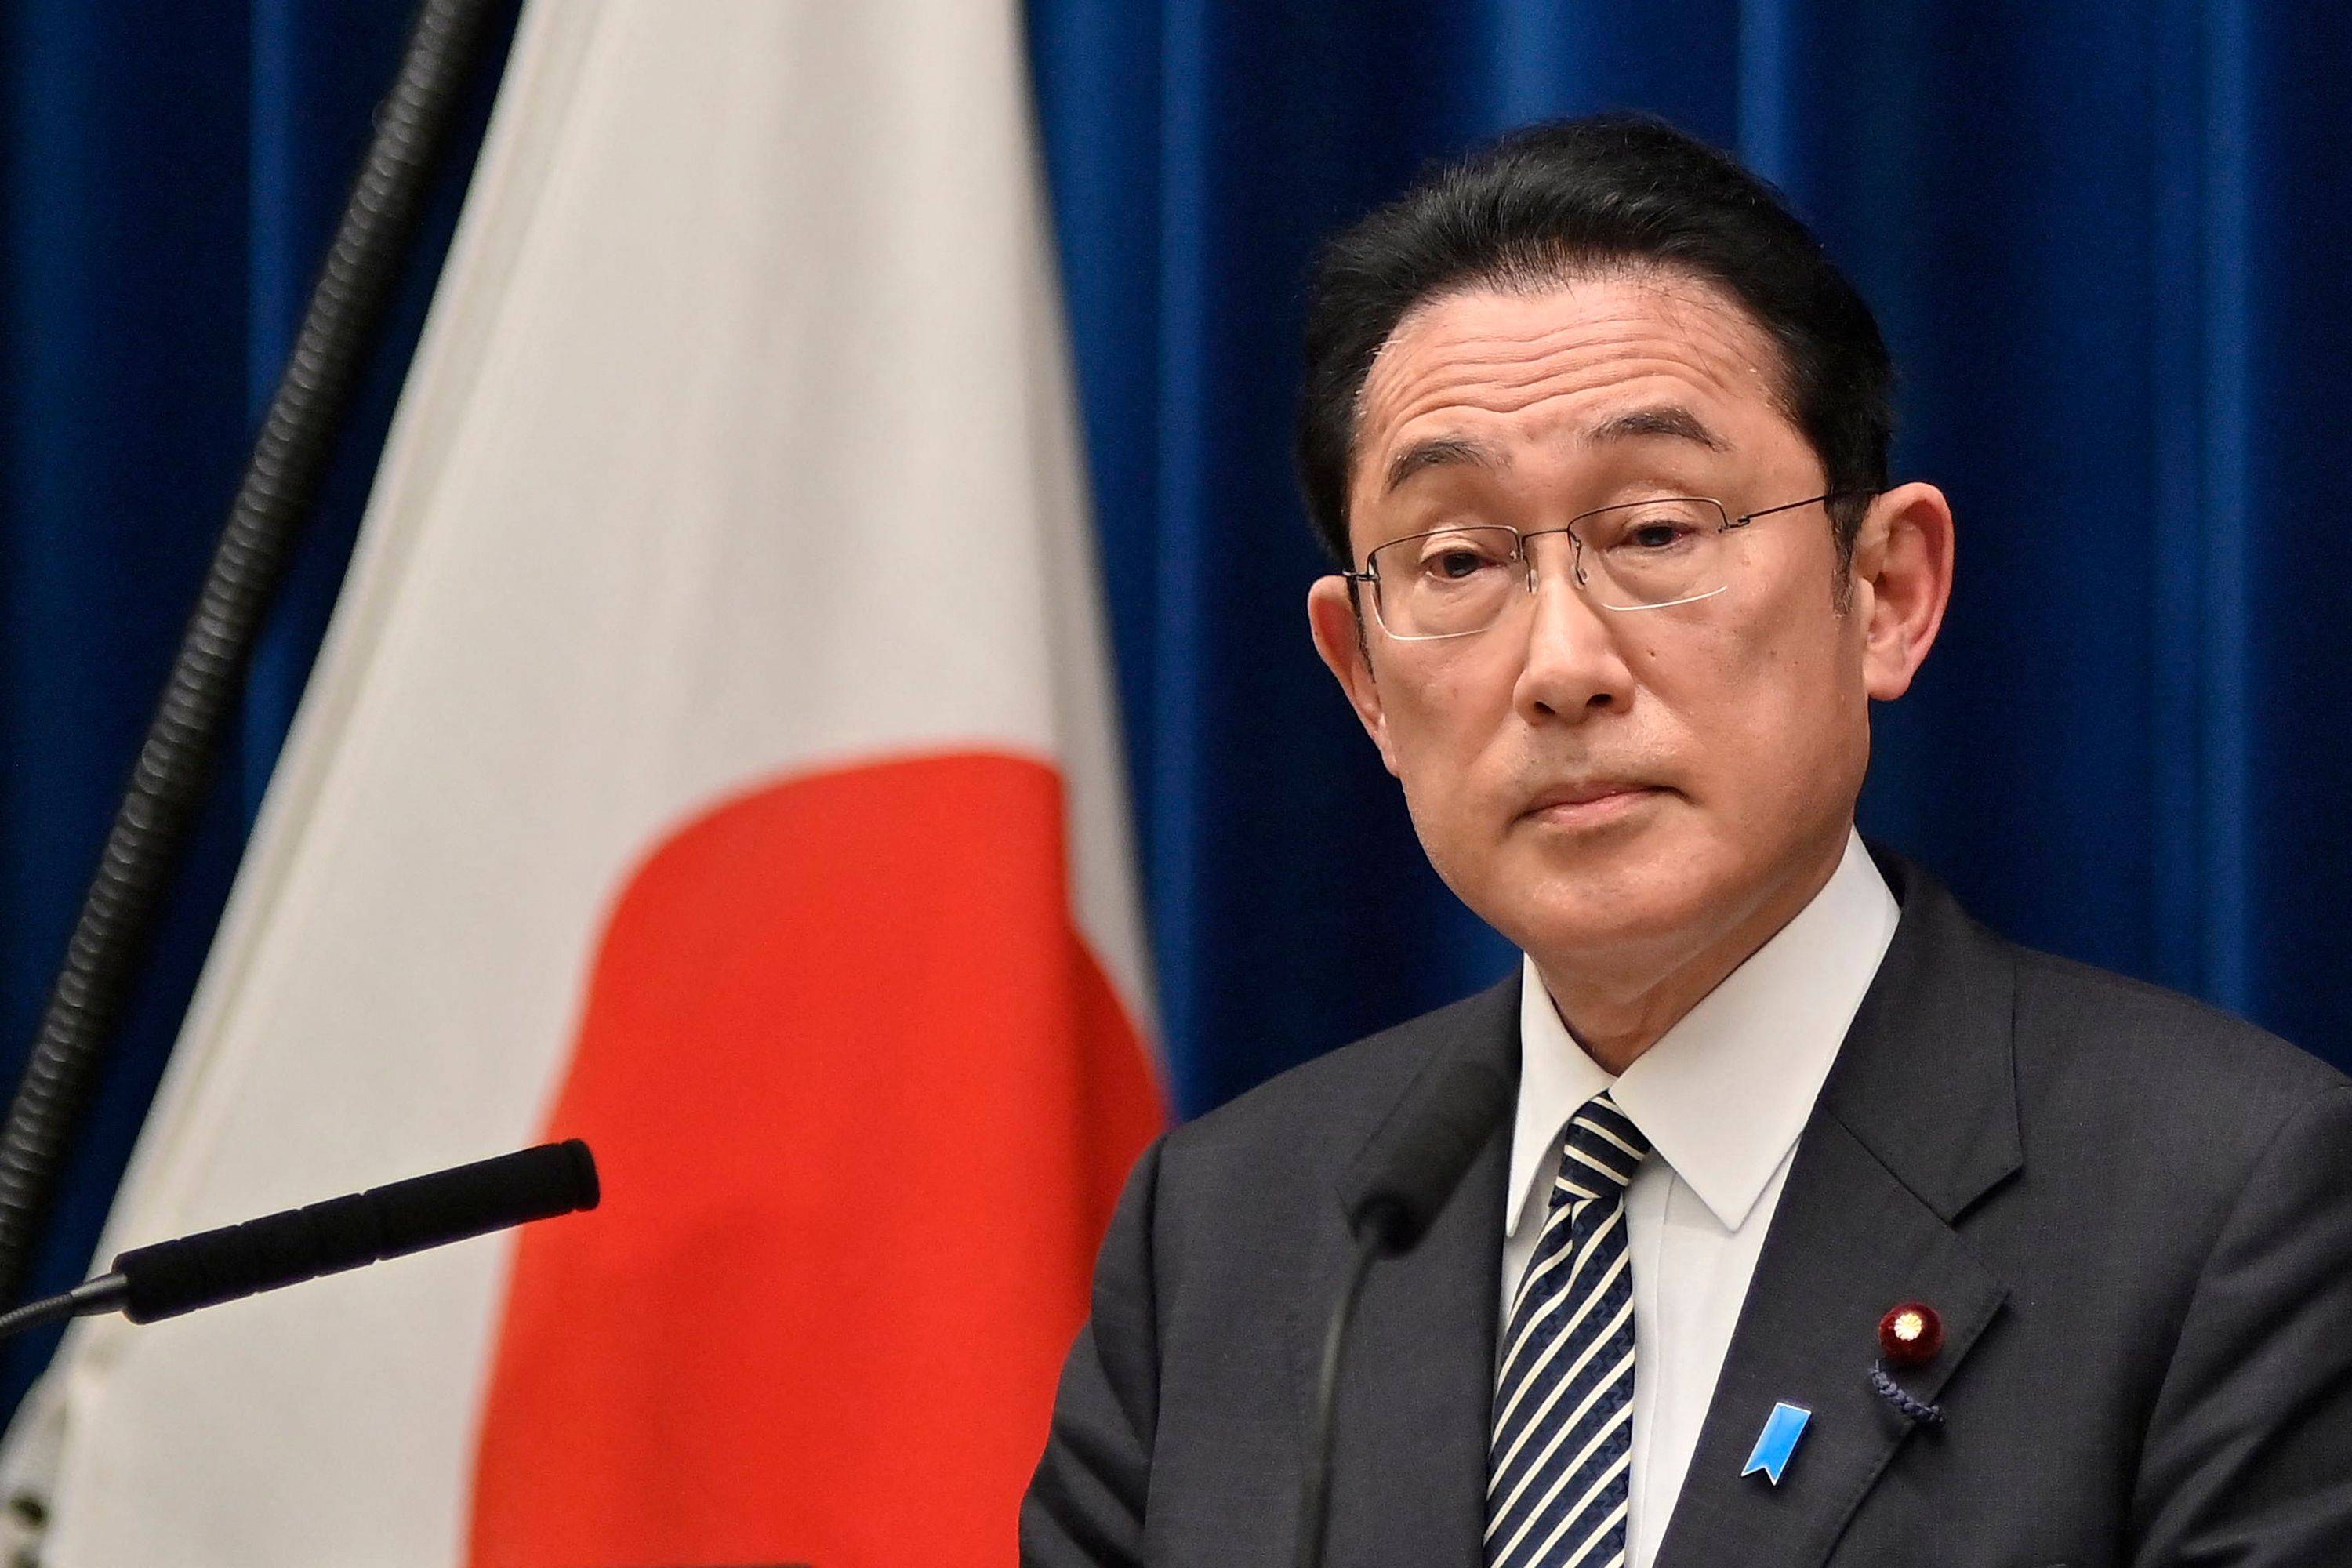 Prime Minister Fumio Kishida is trying to avoid being labeled as a liberal politician, some sources have said. | POOL / VIA AFP-JIJI